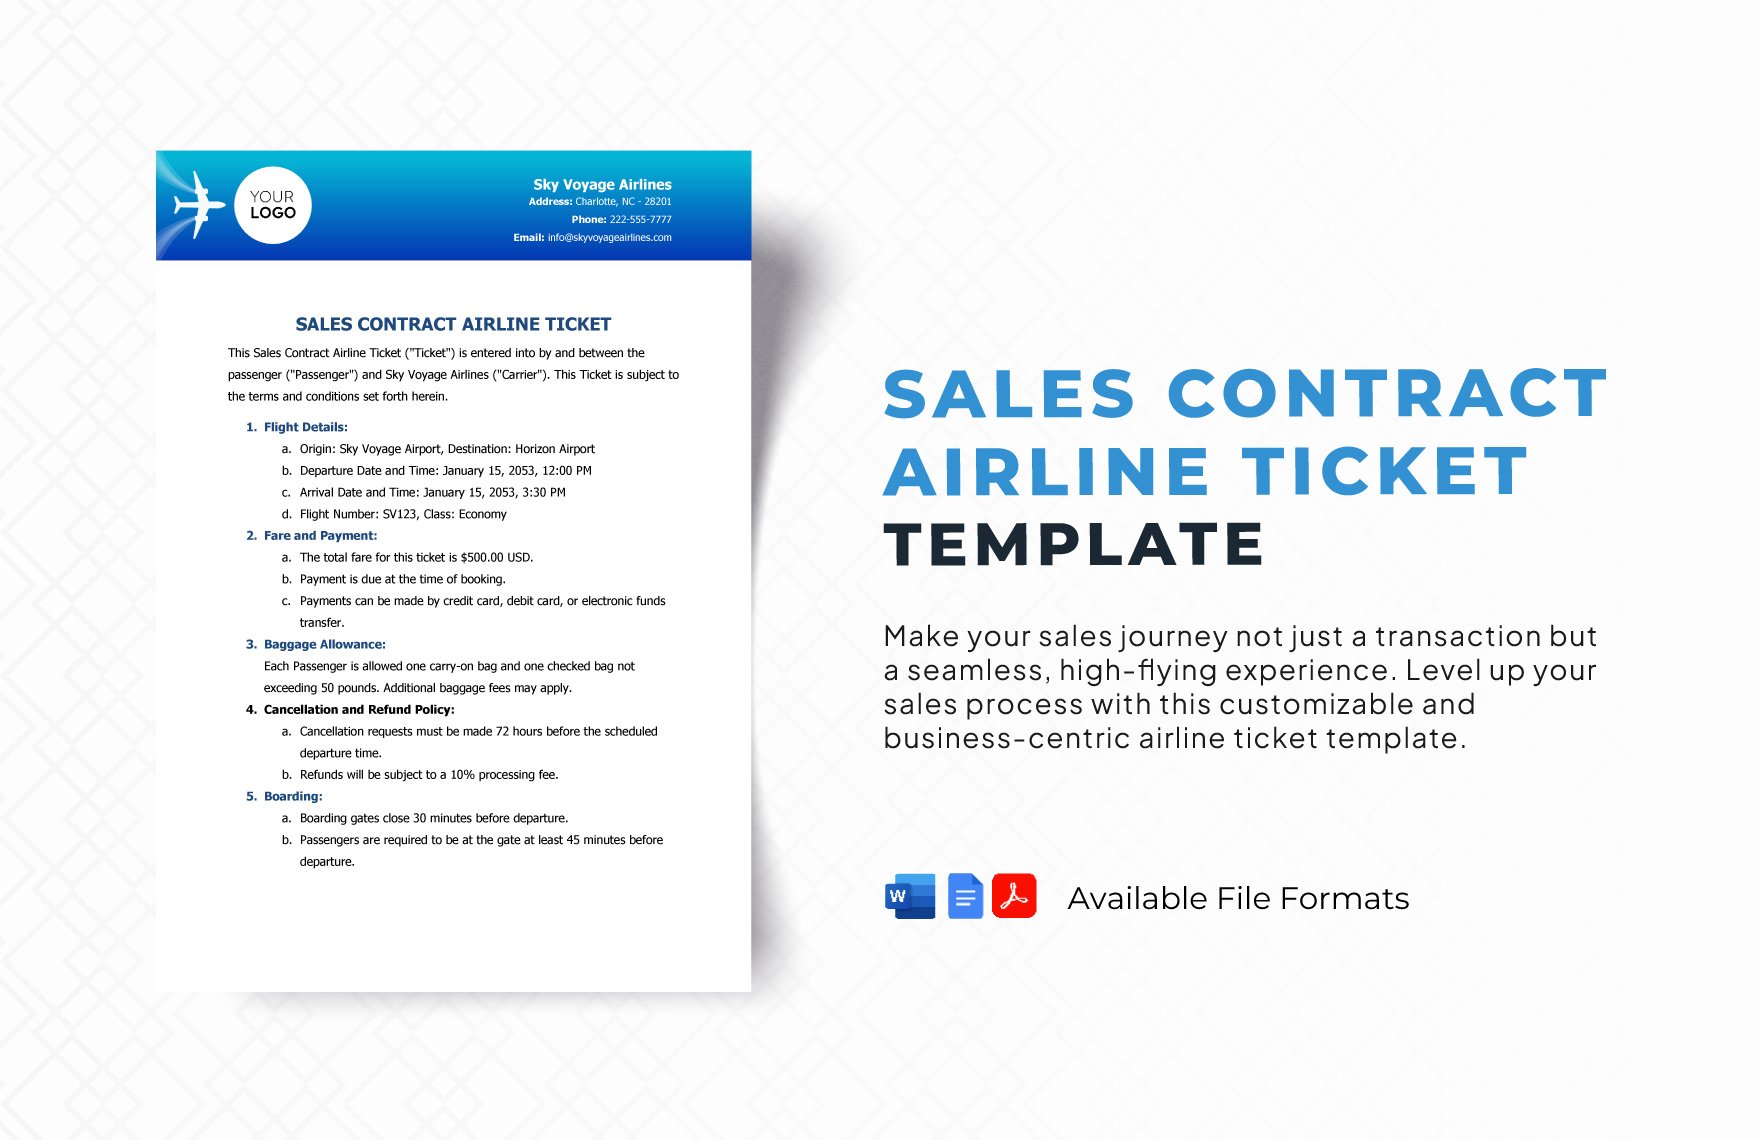 Sales Contract Airline Ticket Template